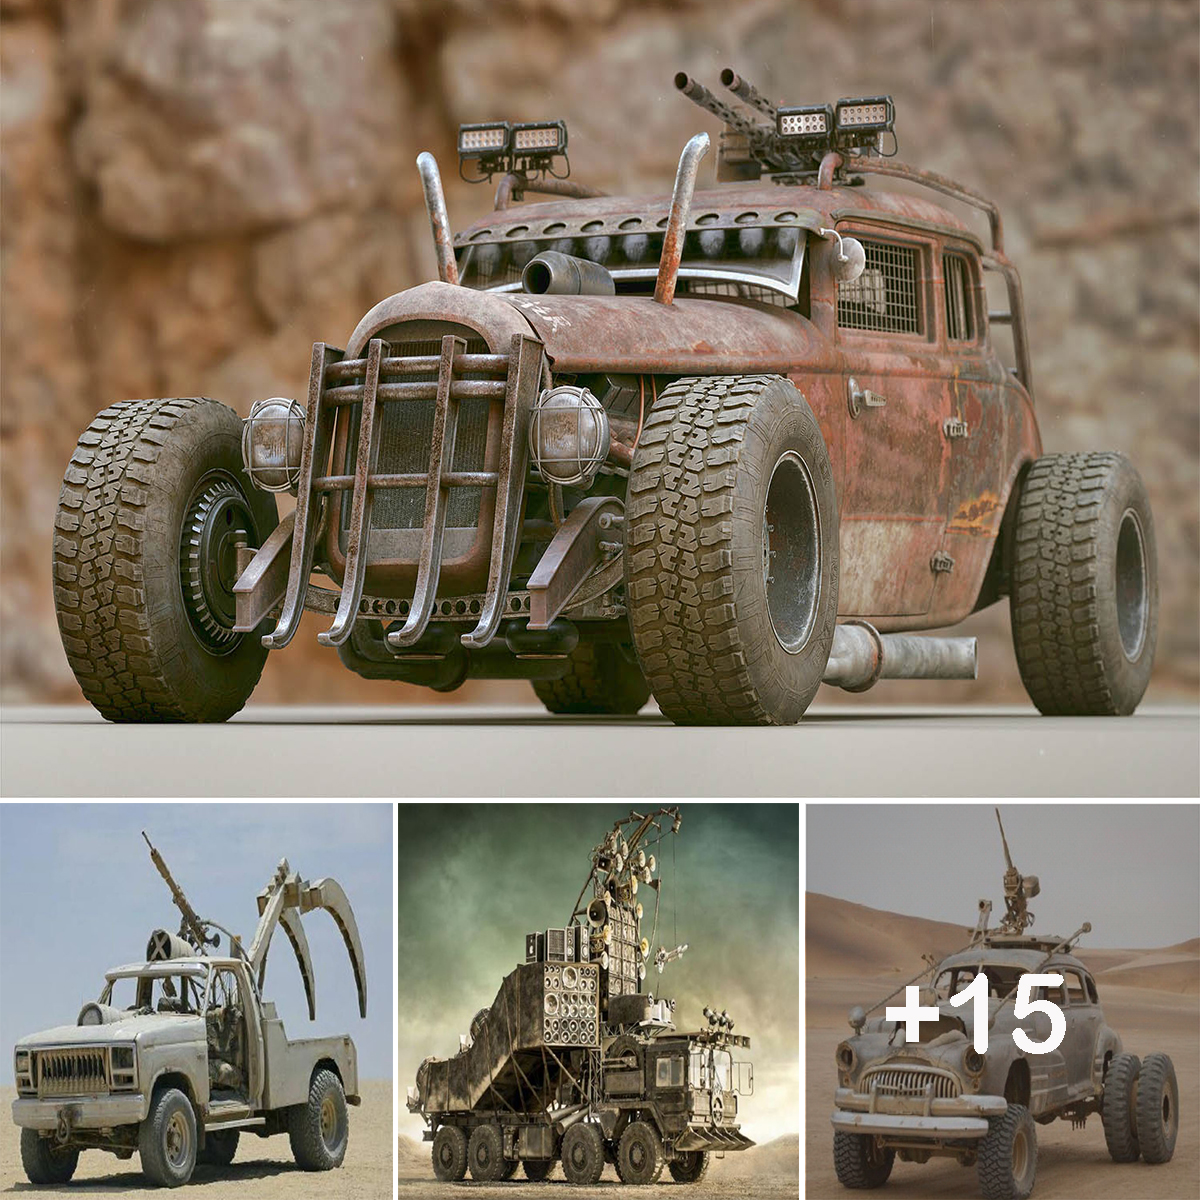 Iconic cars from Mad Max: Fury Road up for auction